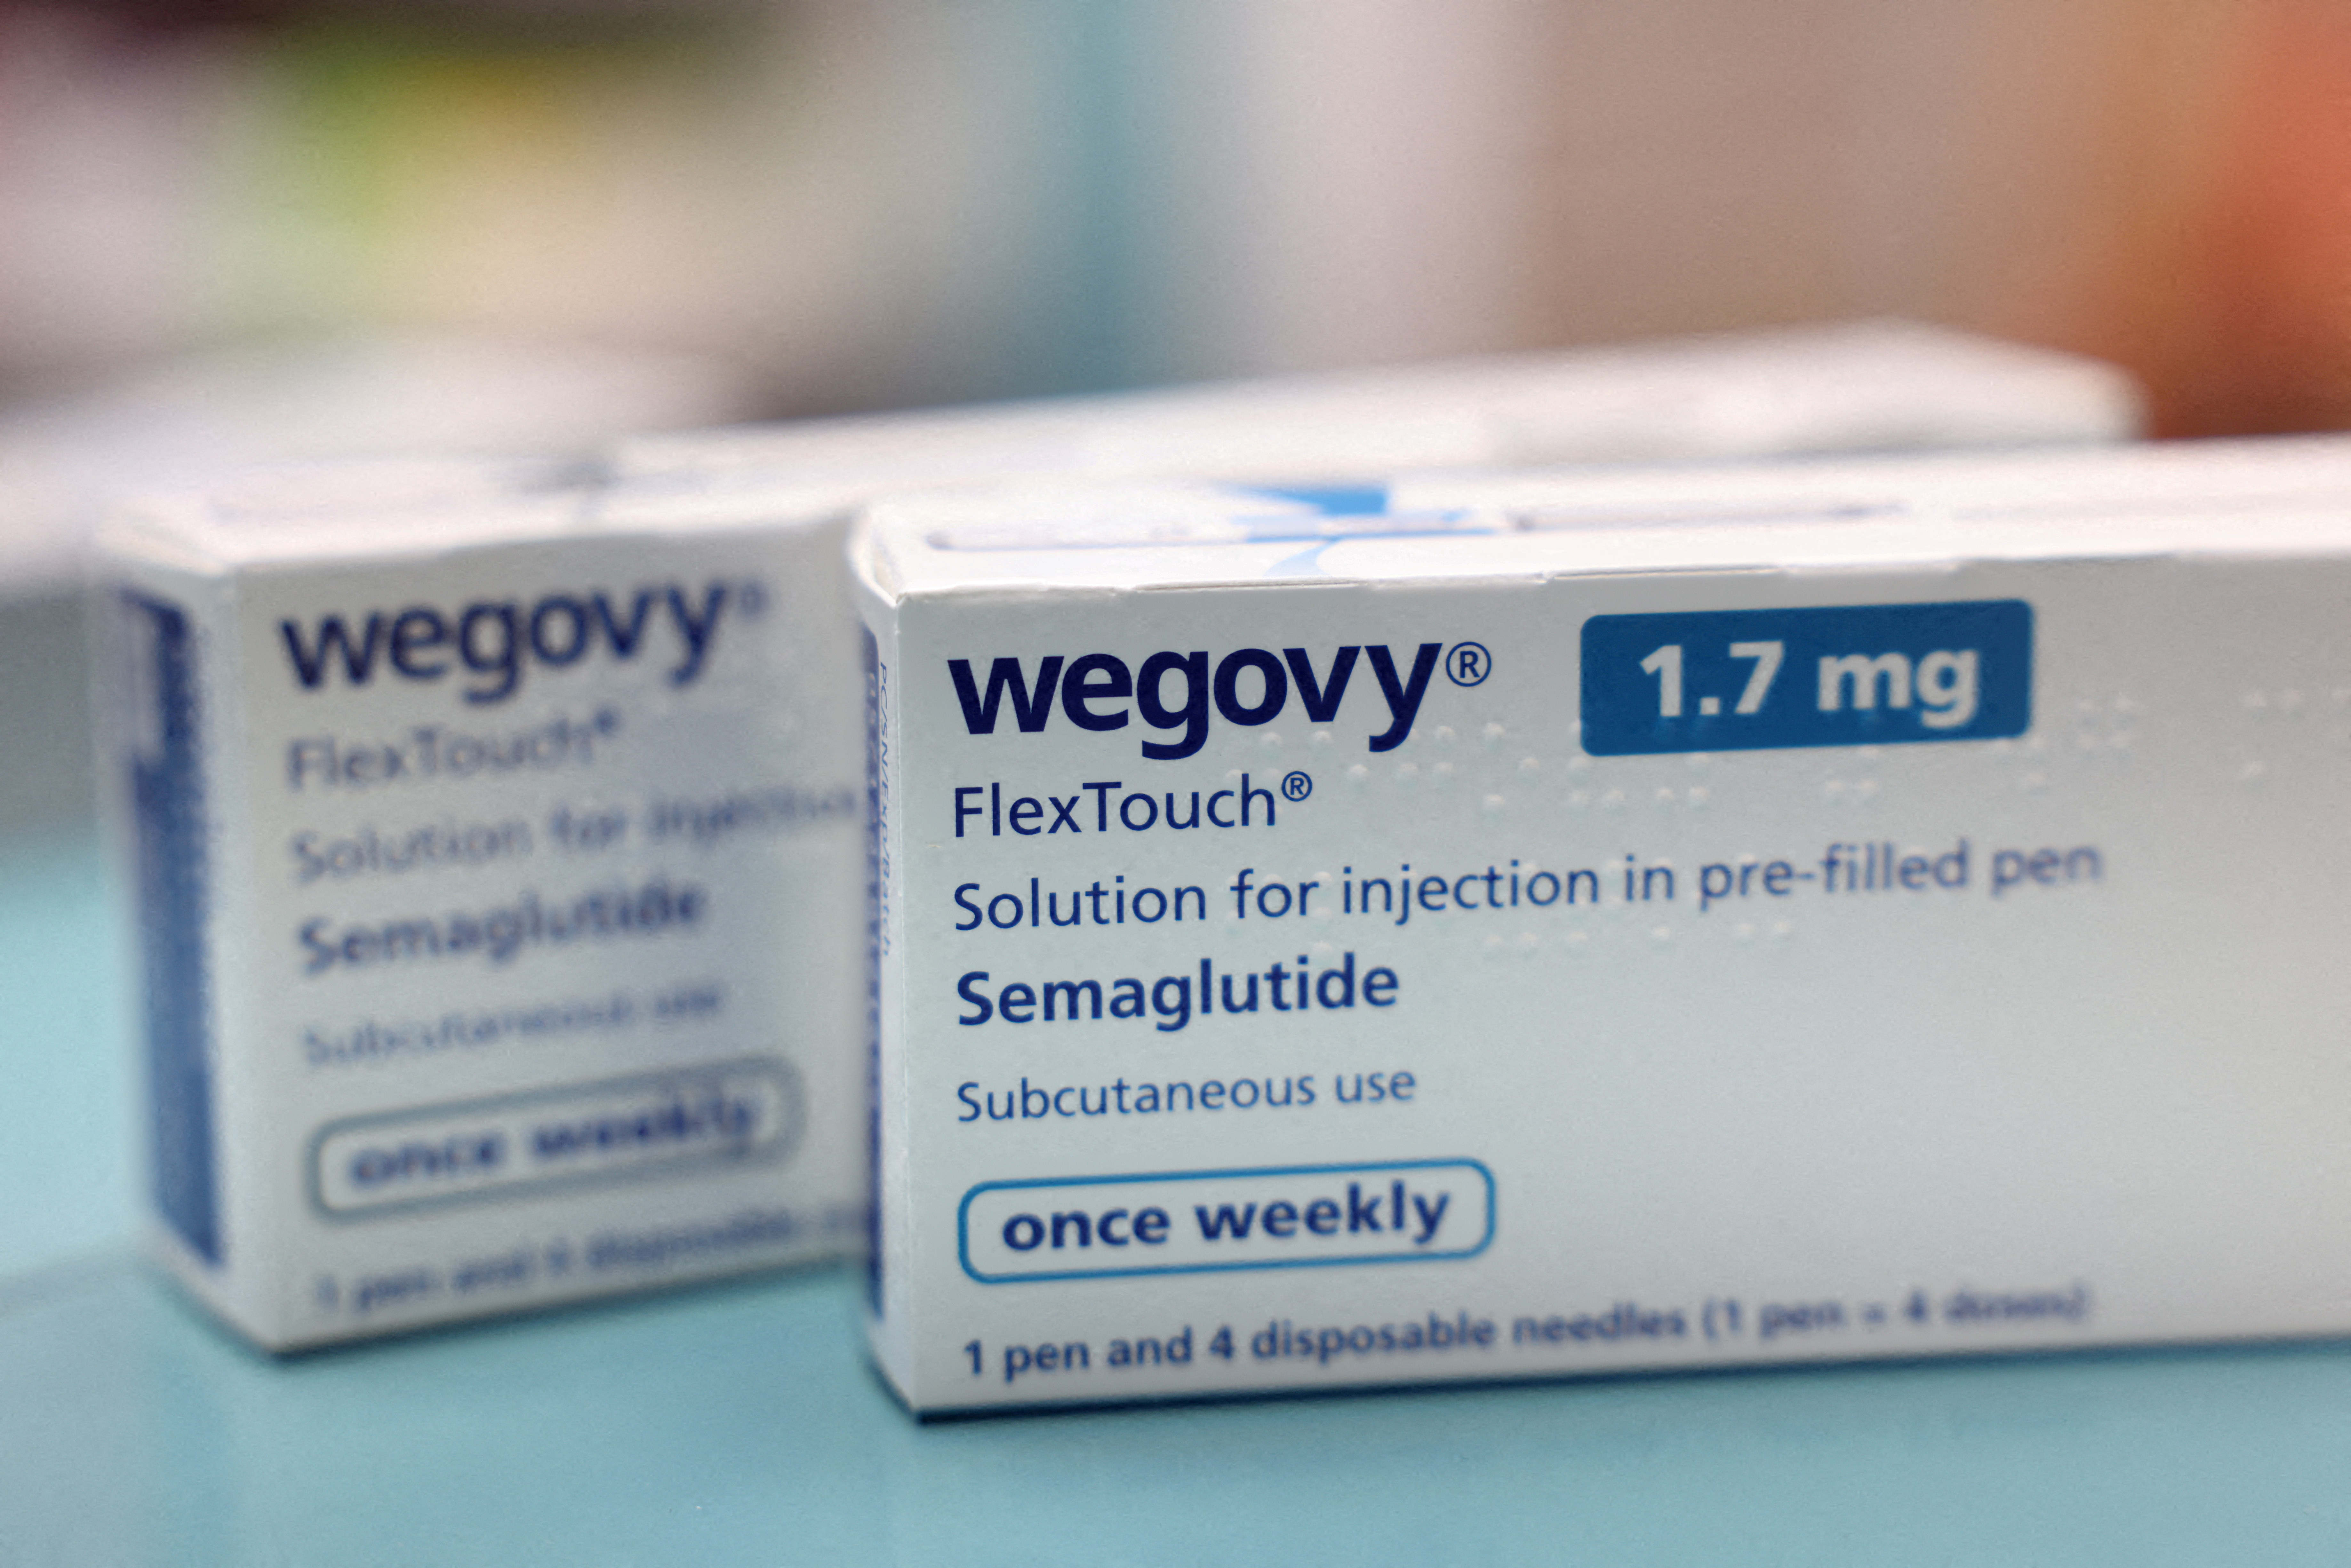 Boxes of Wegovy made by Novo Nordisk are seen at a pharmacy in London